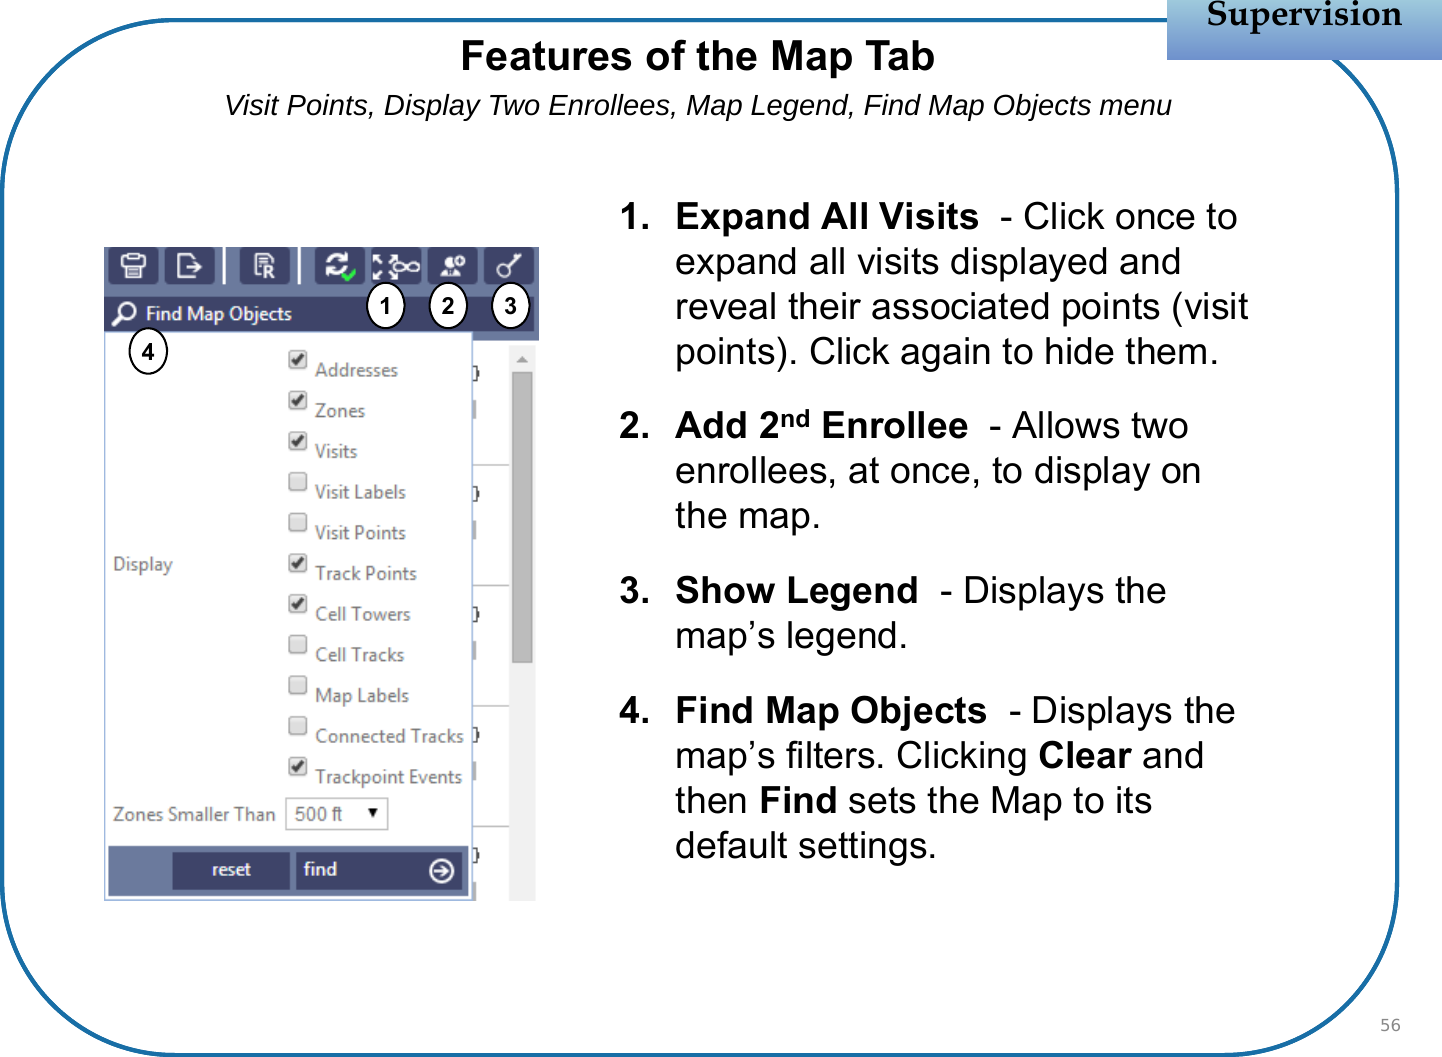 1. Expand All Visits  - Click once to expand all visits displayed and reveal their associated points (visit points). Click again to hide them.2. Add 2nd Enrollee  - Allows two enrollees, at once, to display on the map.3. Show Legend  - Displays the map’s legend.4. Find Map Objects - Displays the map’s filters. Clicking Clear and then Find sets the Map to its default settings.SupervisionSupervision56Features of the Map TabVisit Points, Display Two Enrollees, Map Legend, Find Map Objects menu1234